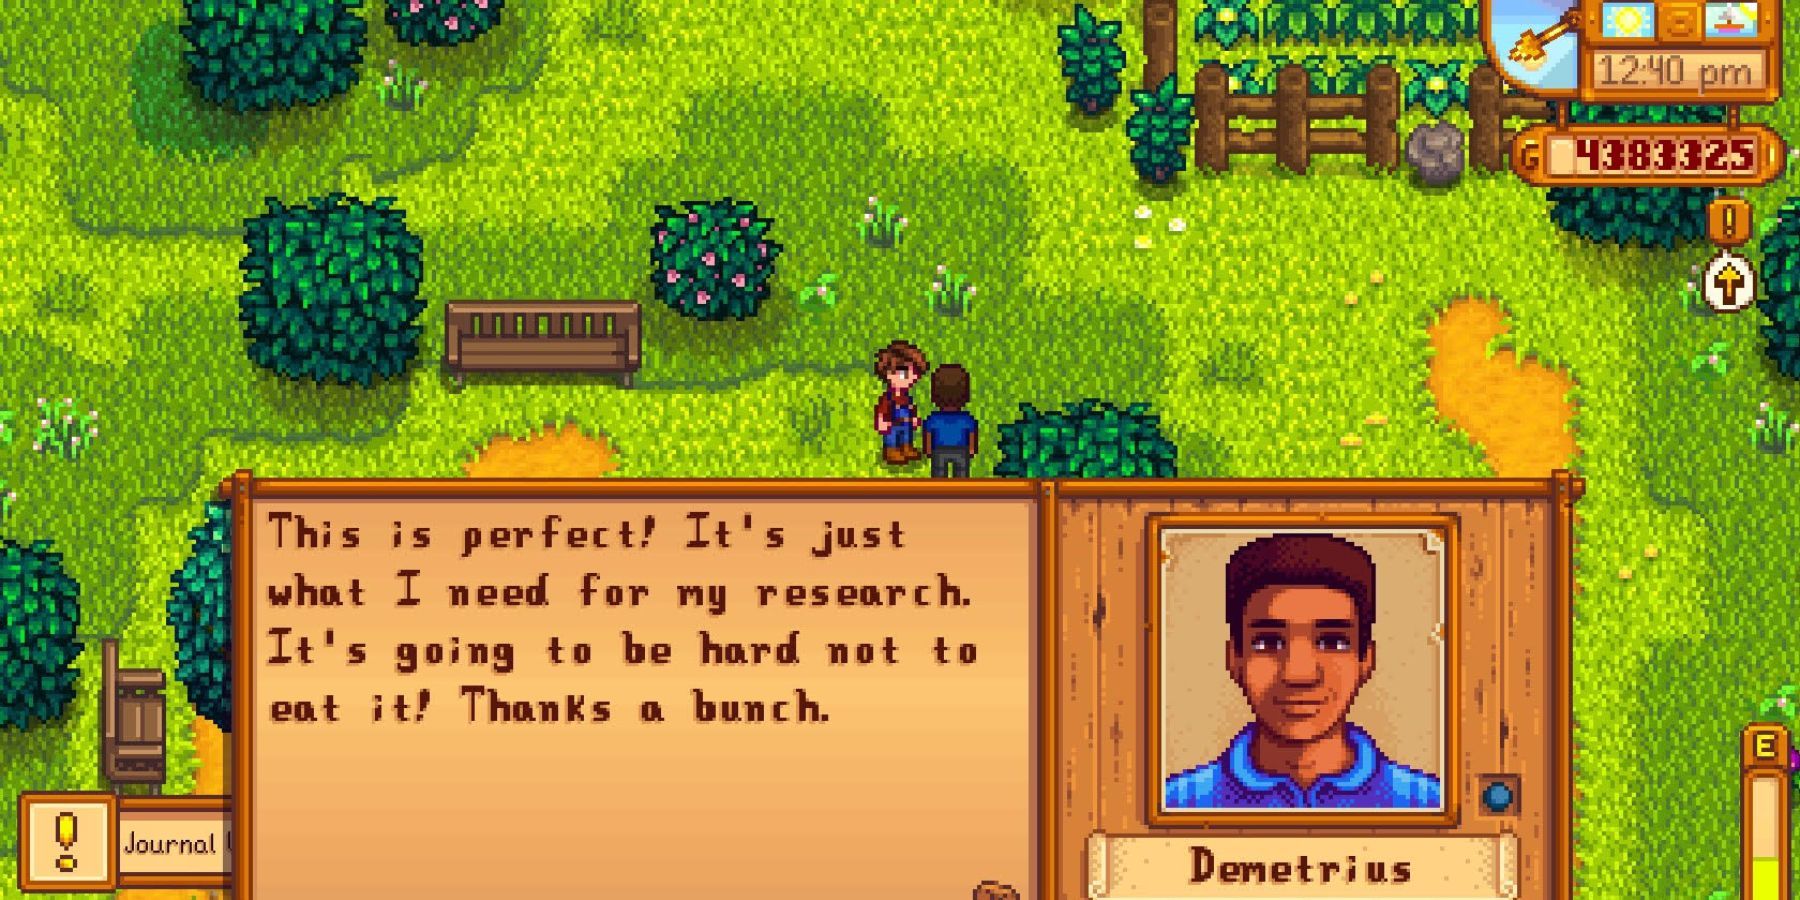 gifting melon to Demetrius in Stardew Valley